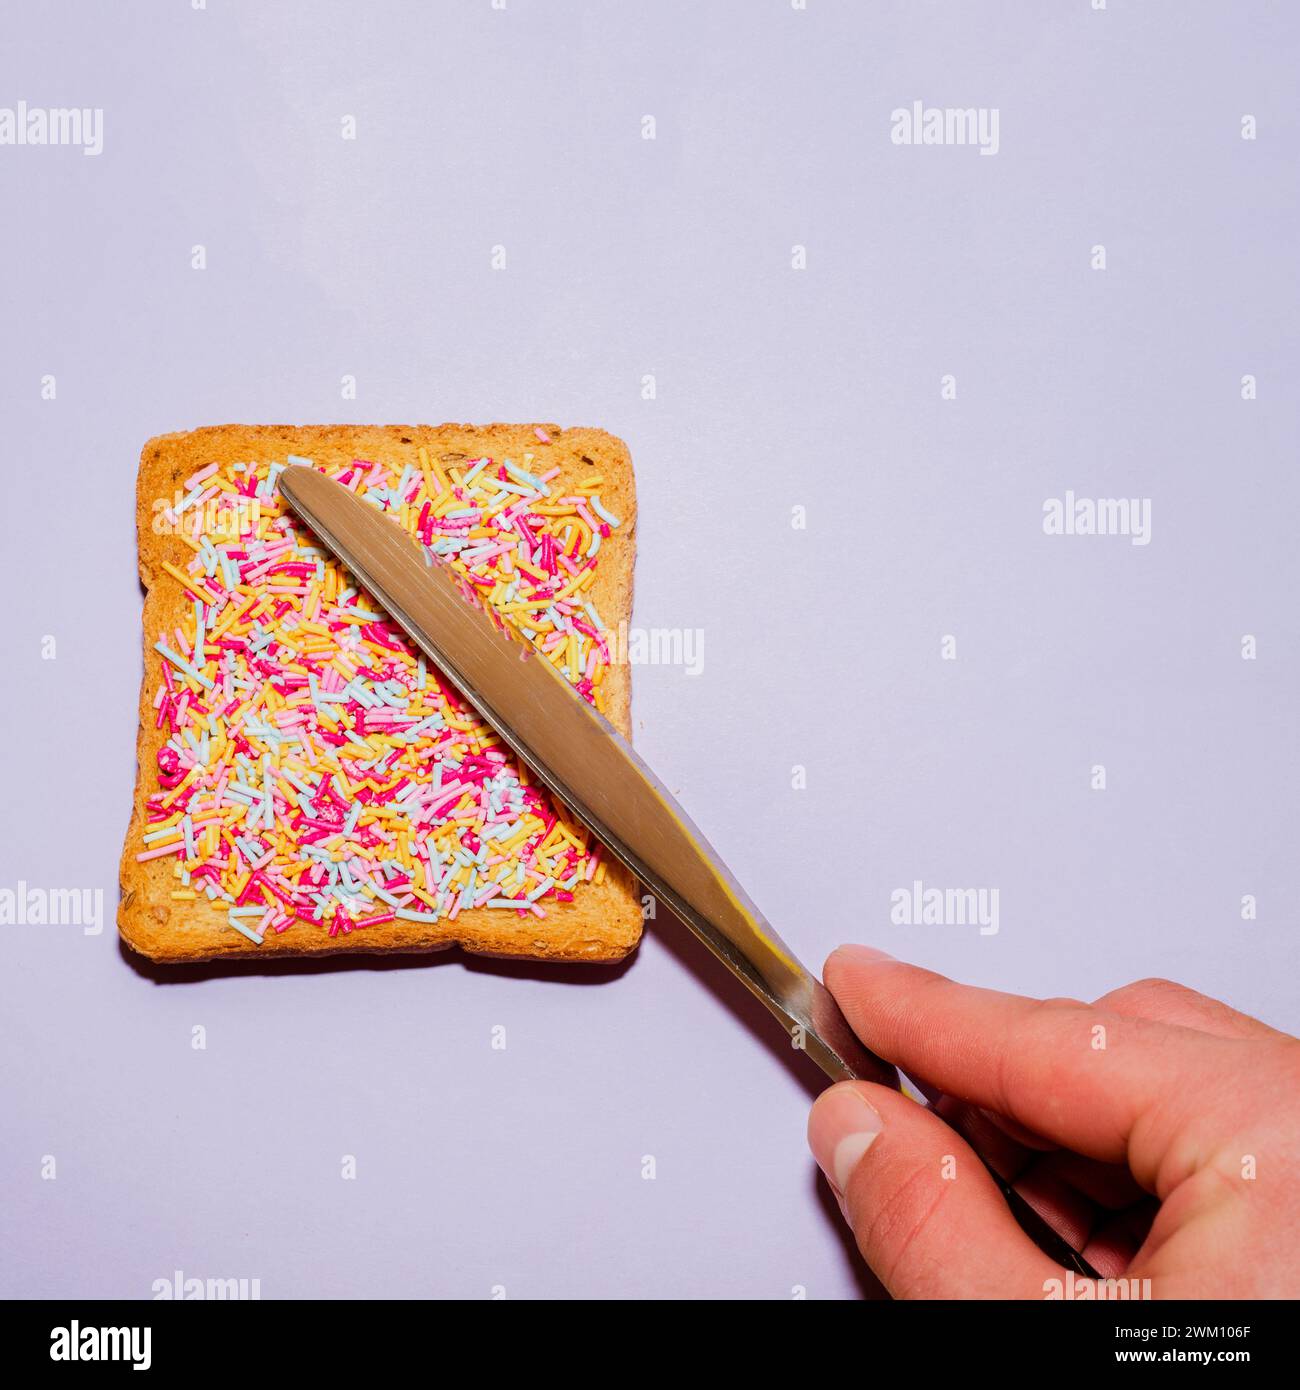 Knife spread colorful sprinkles on toast on a purple background. Creative food concept. Stock Photo